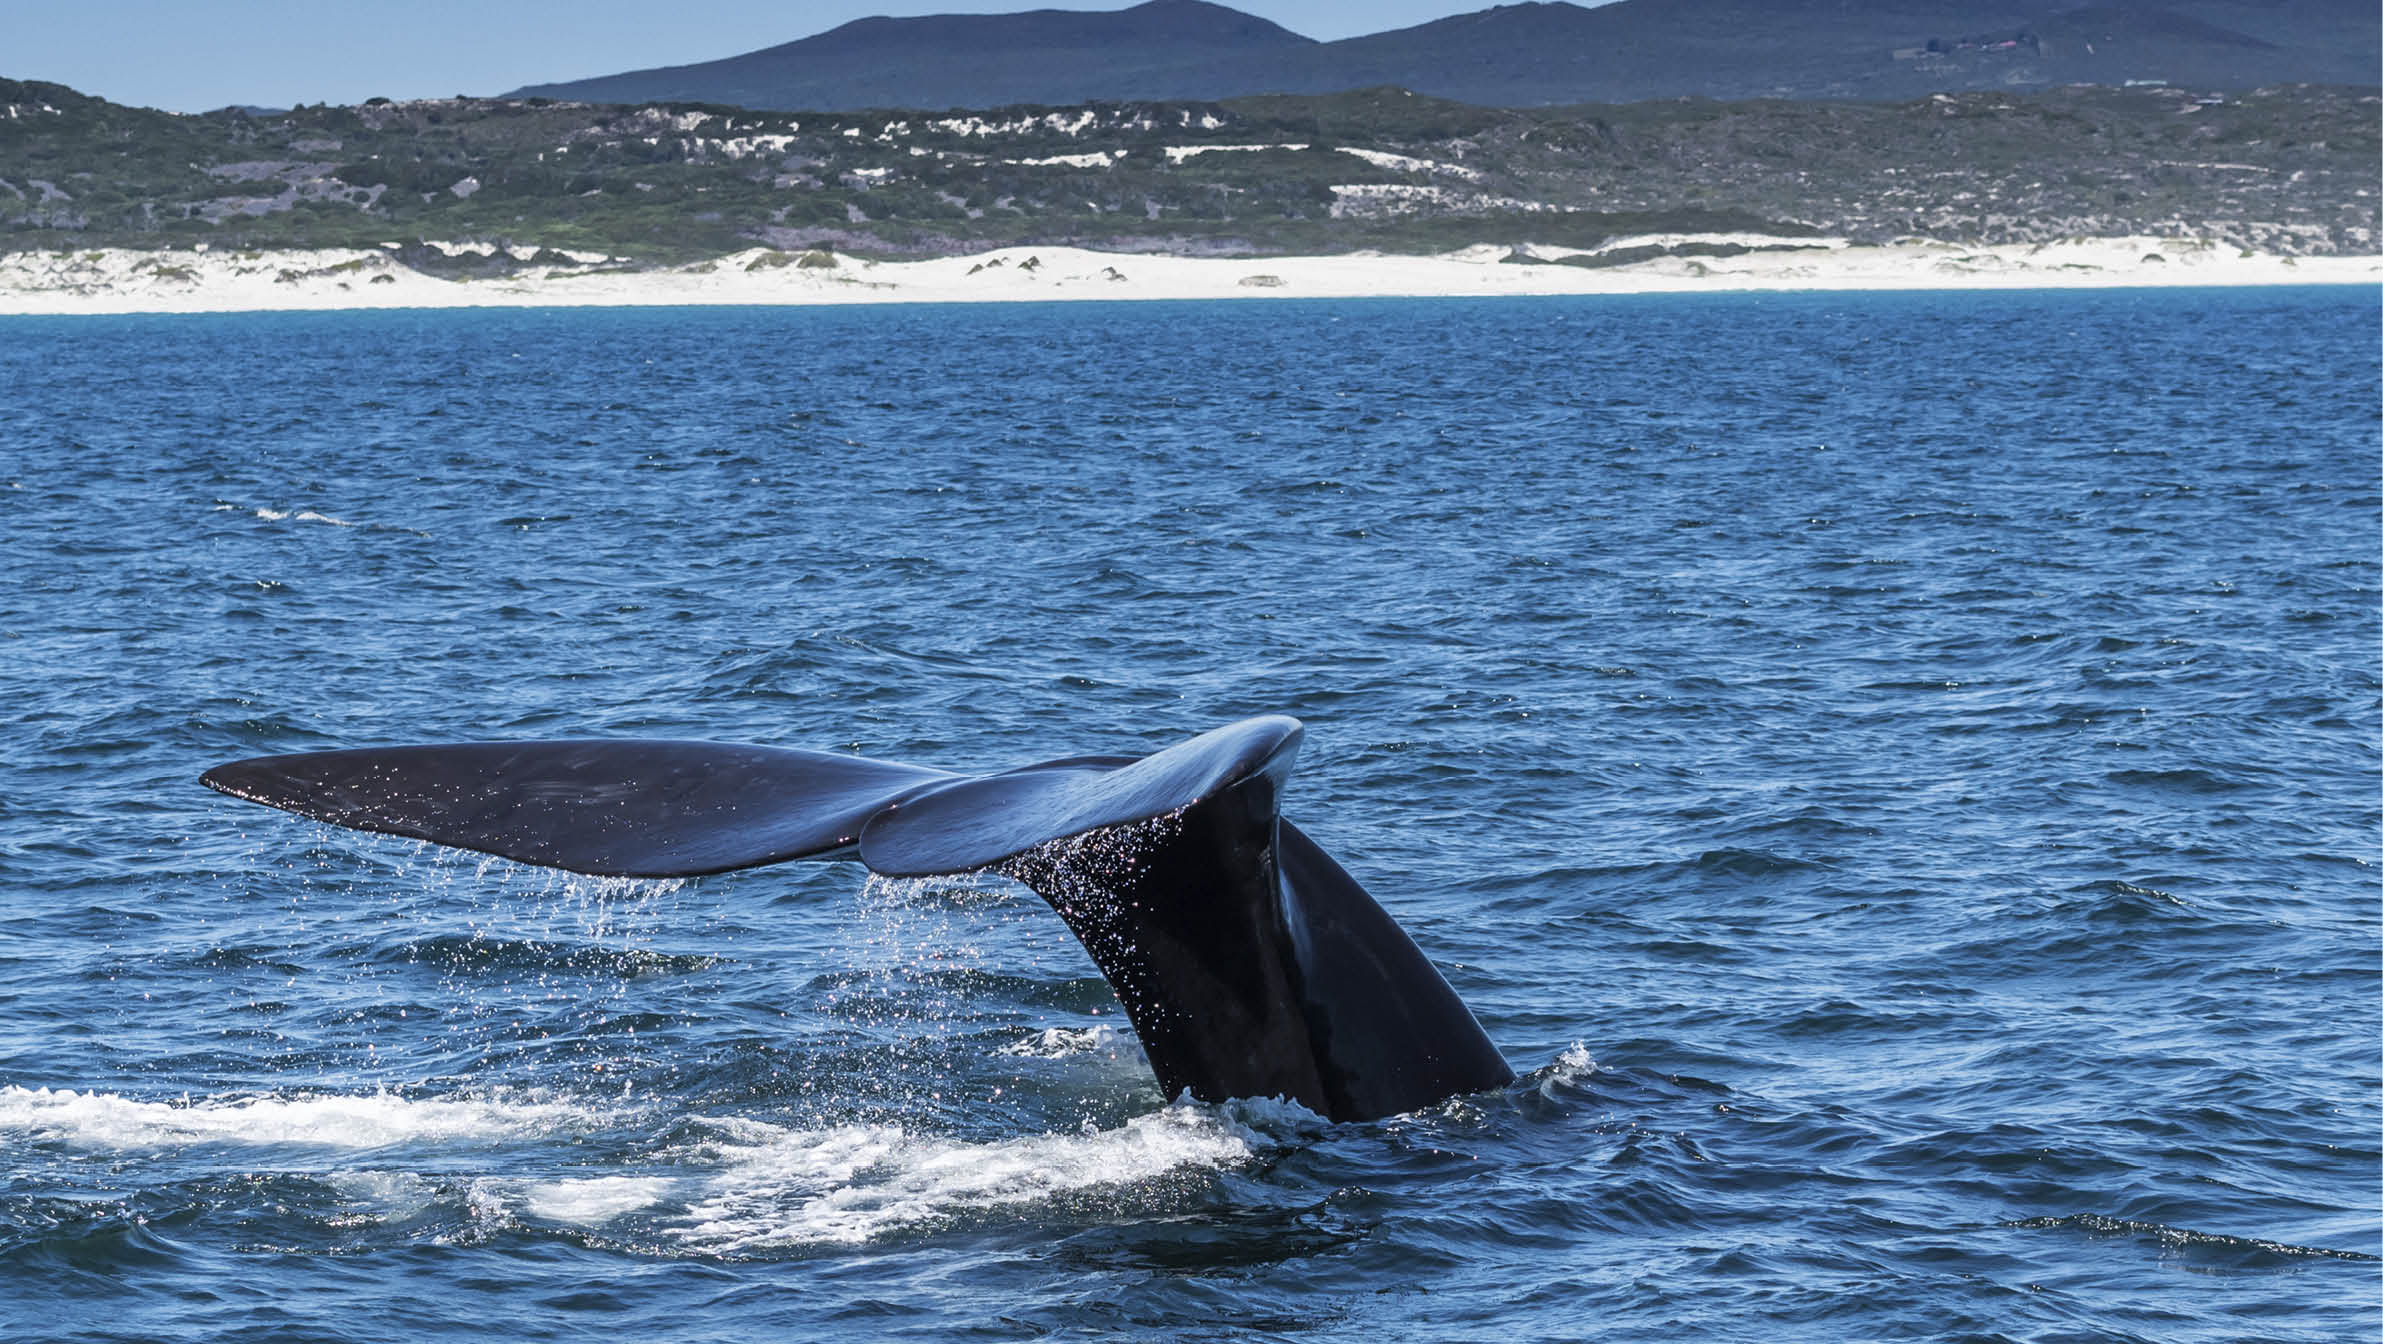 A southern right whale off the coast of Hermanus, South Africa, flipping her tail in the air, while diving under the water.